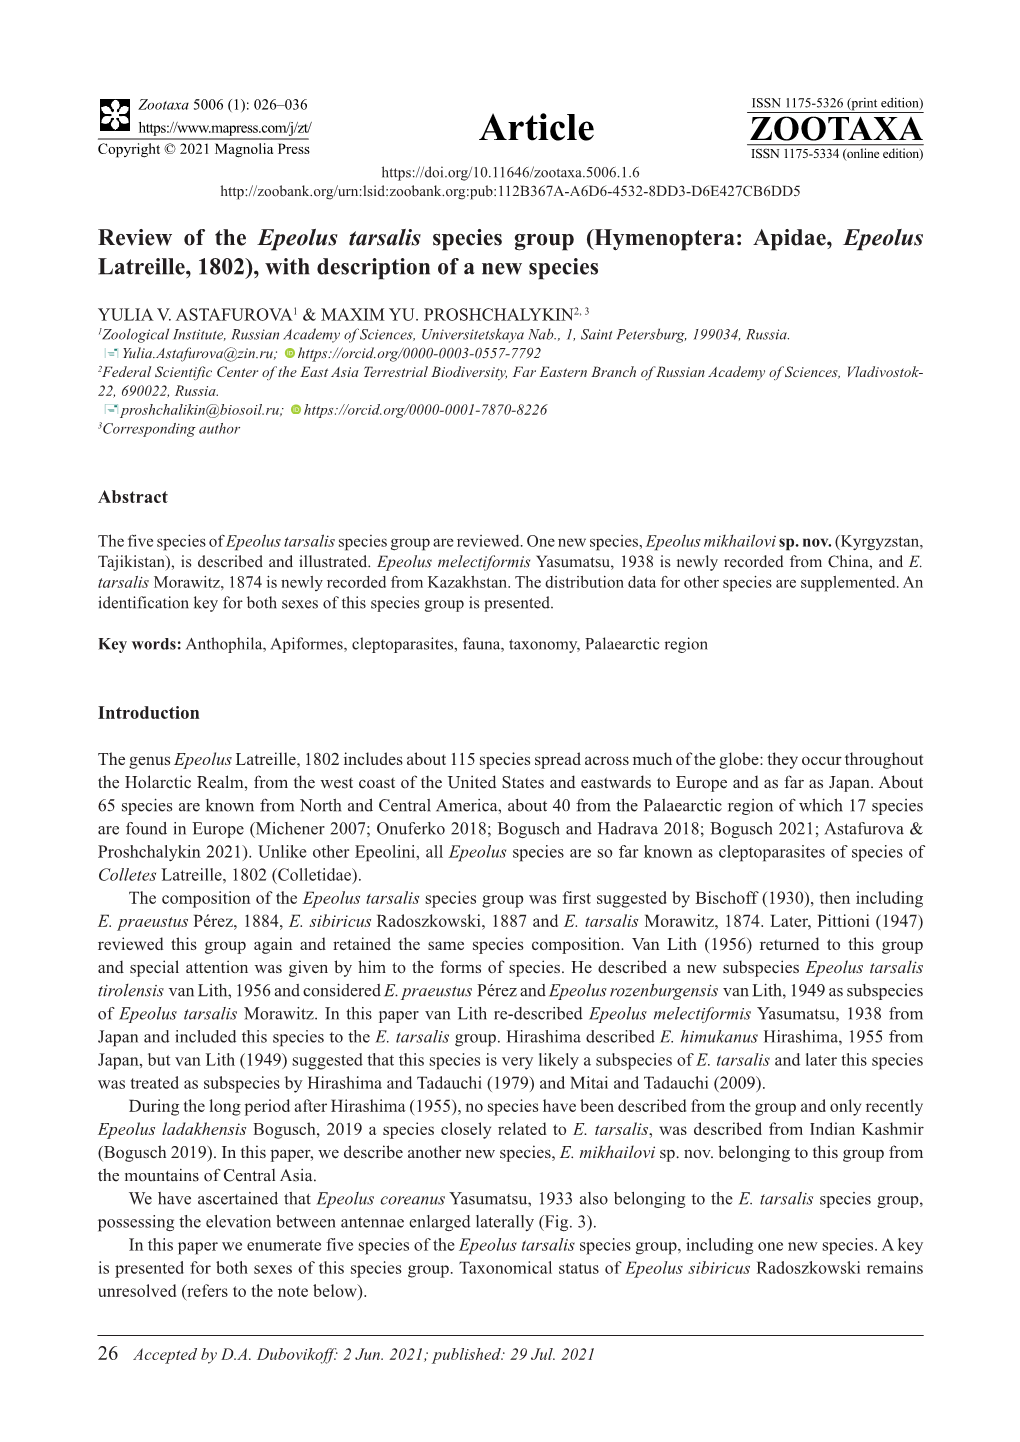 Review of the Epeolus Tarsalis Species Group (Hymenoptera: Apidae, Epeolus Latreille, 1802), with Description of a New Species